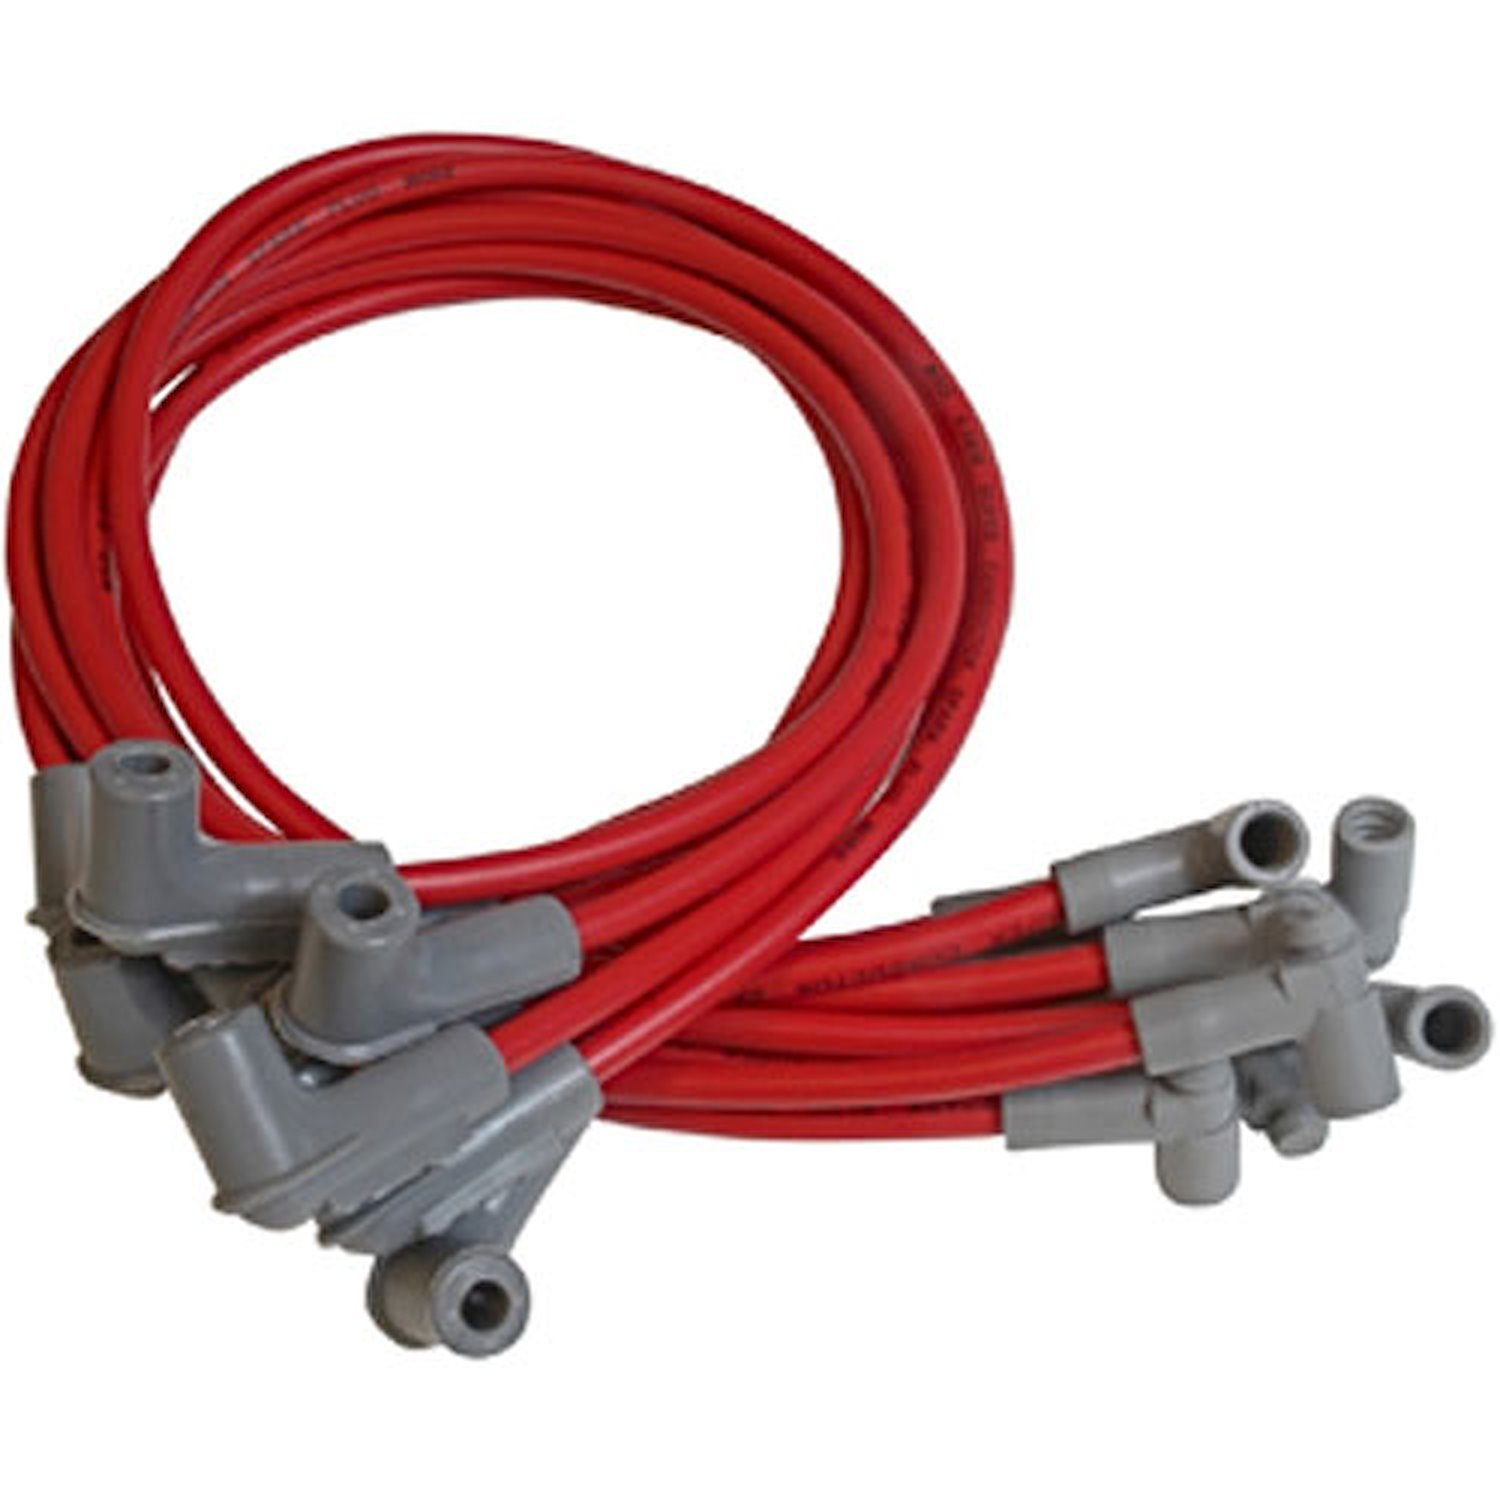 35599 Super Conductor 8.5mm Wires Red